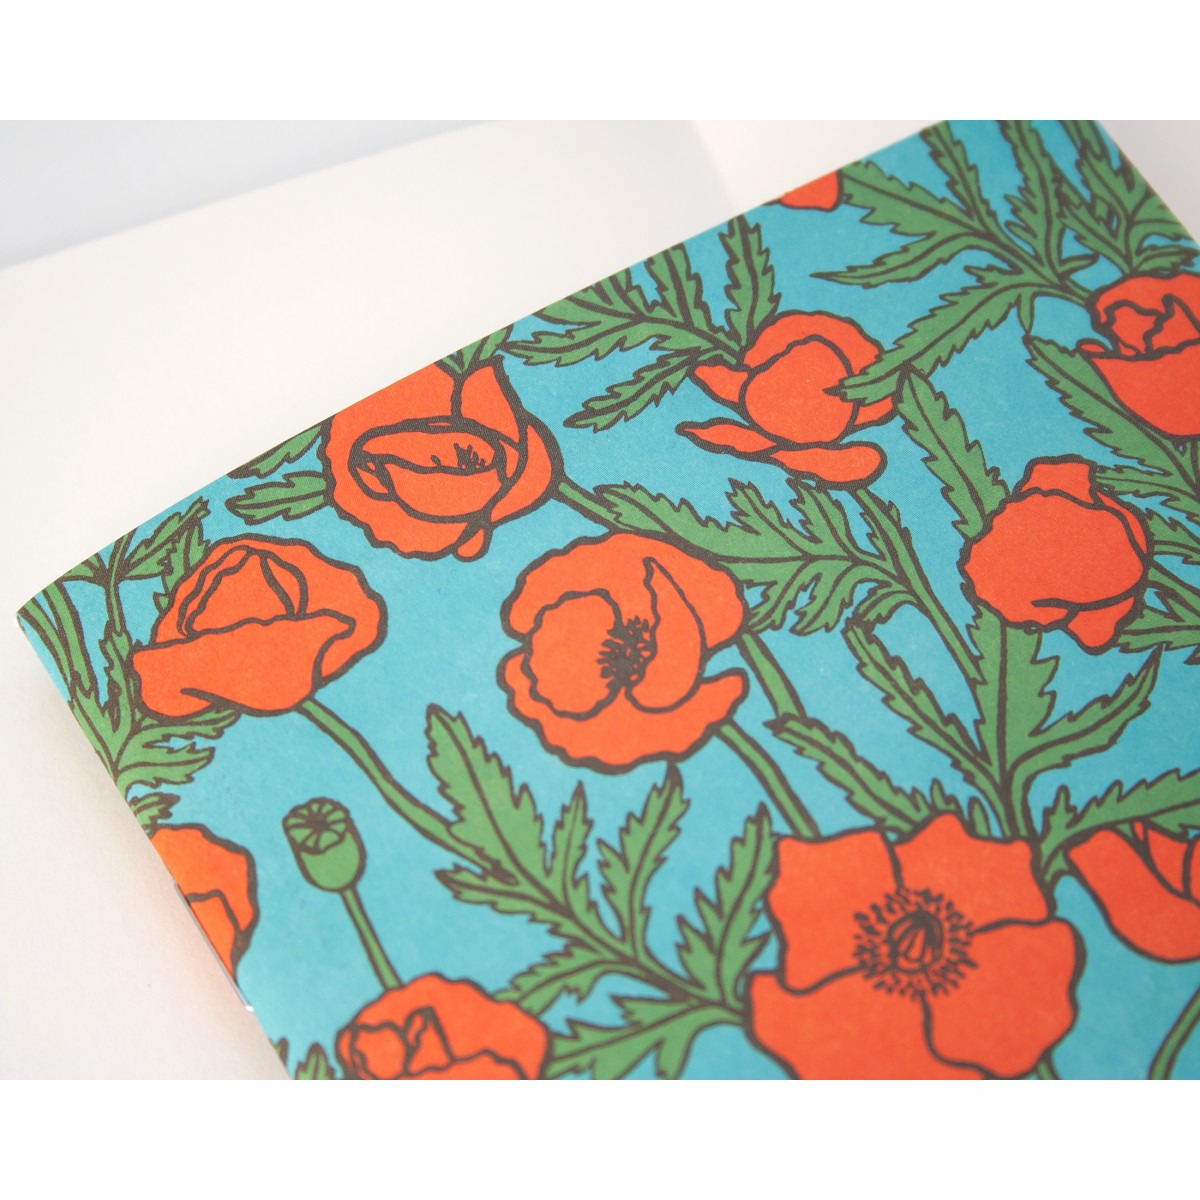 Notizheft A6 mit Mohnmuster // Papaya paper products